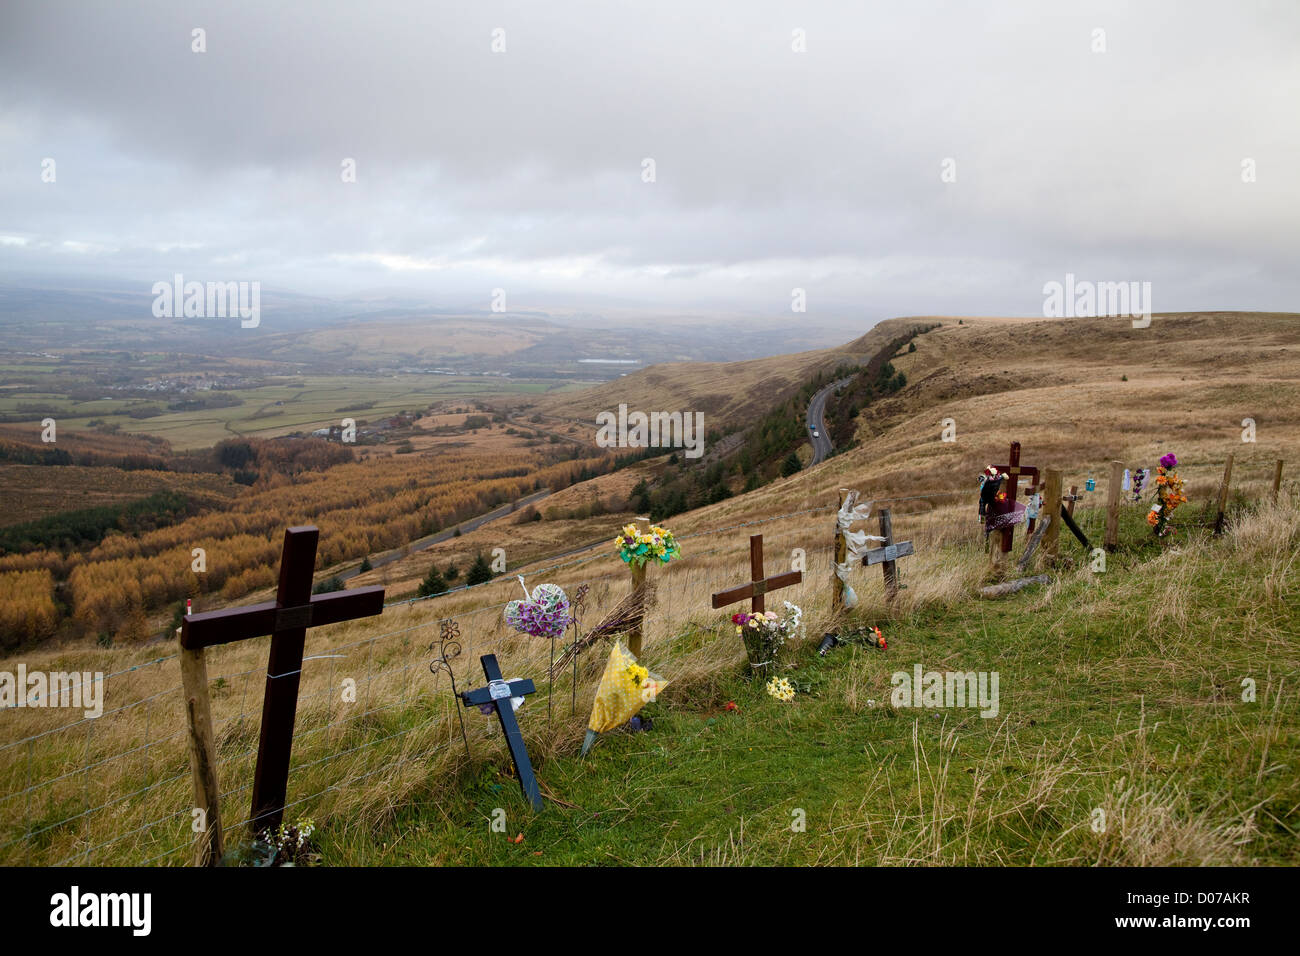 Miners tributes left on the hilltop, Craig y Llyn, northern region of the Rhondda Valley, South Wales, United Kingdom Stock Photo